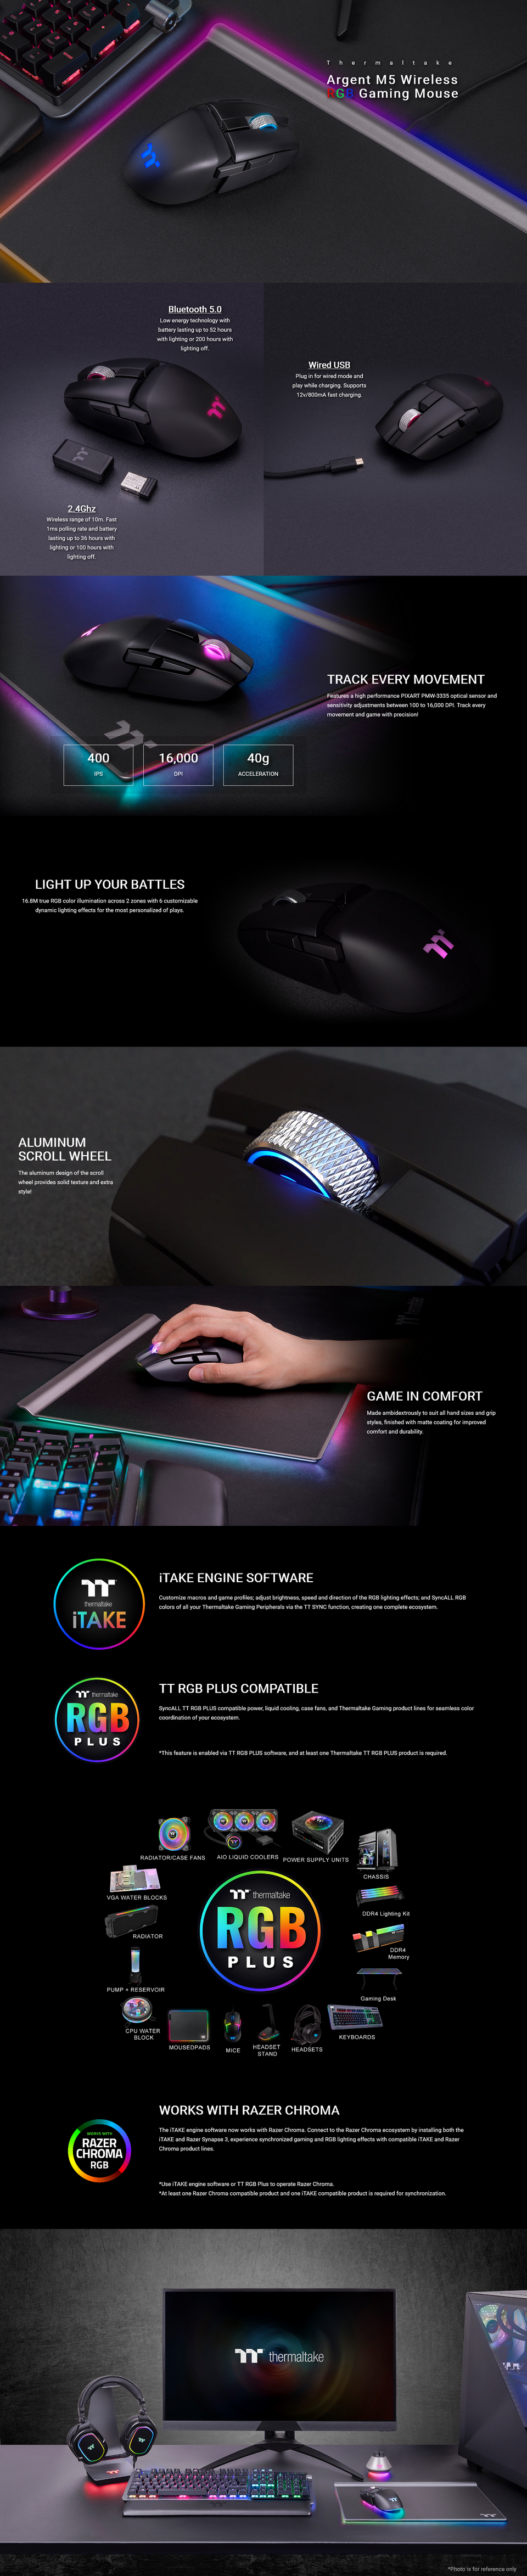 thermaltake argent m5 wireless rgb gaming mouse pn gmo-tmf-hyoobk-01